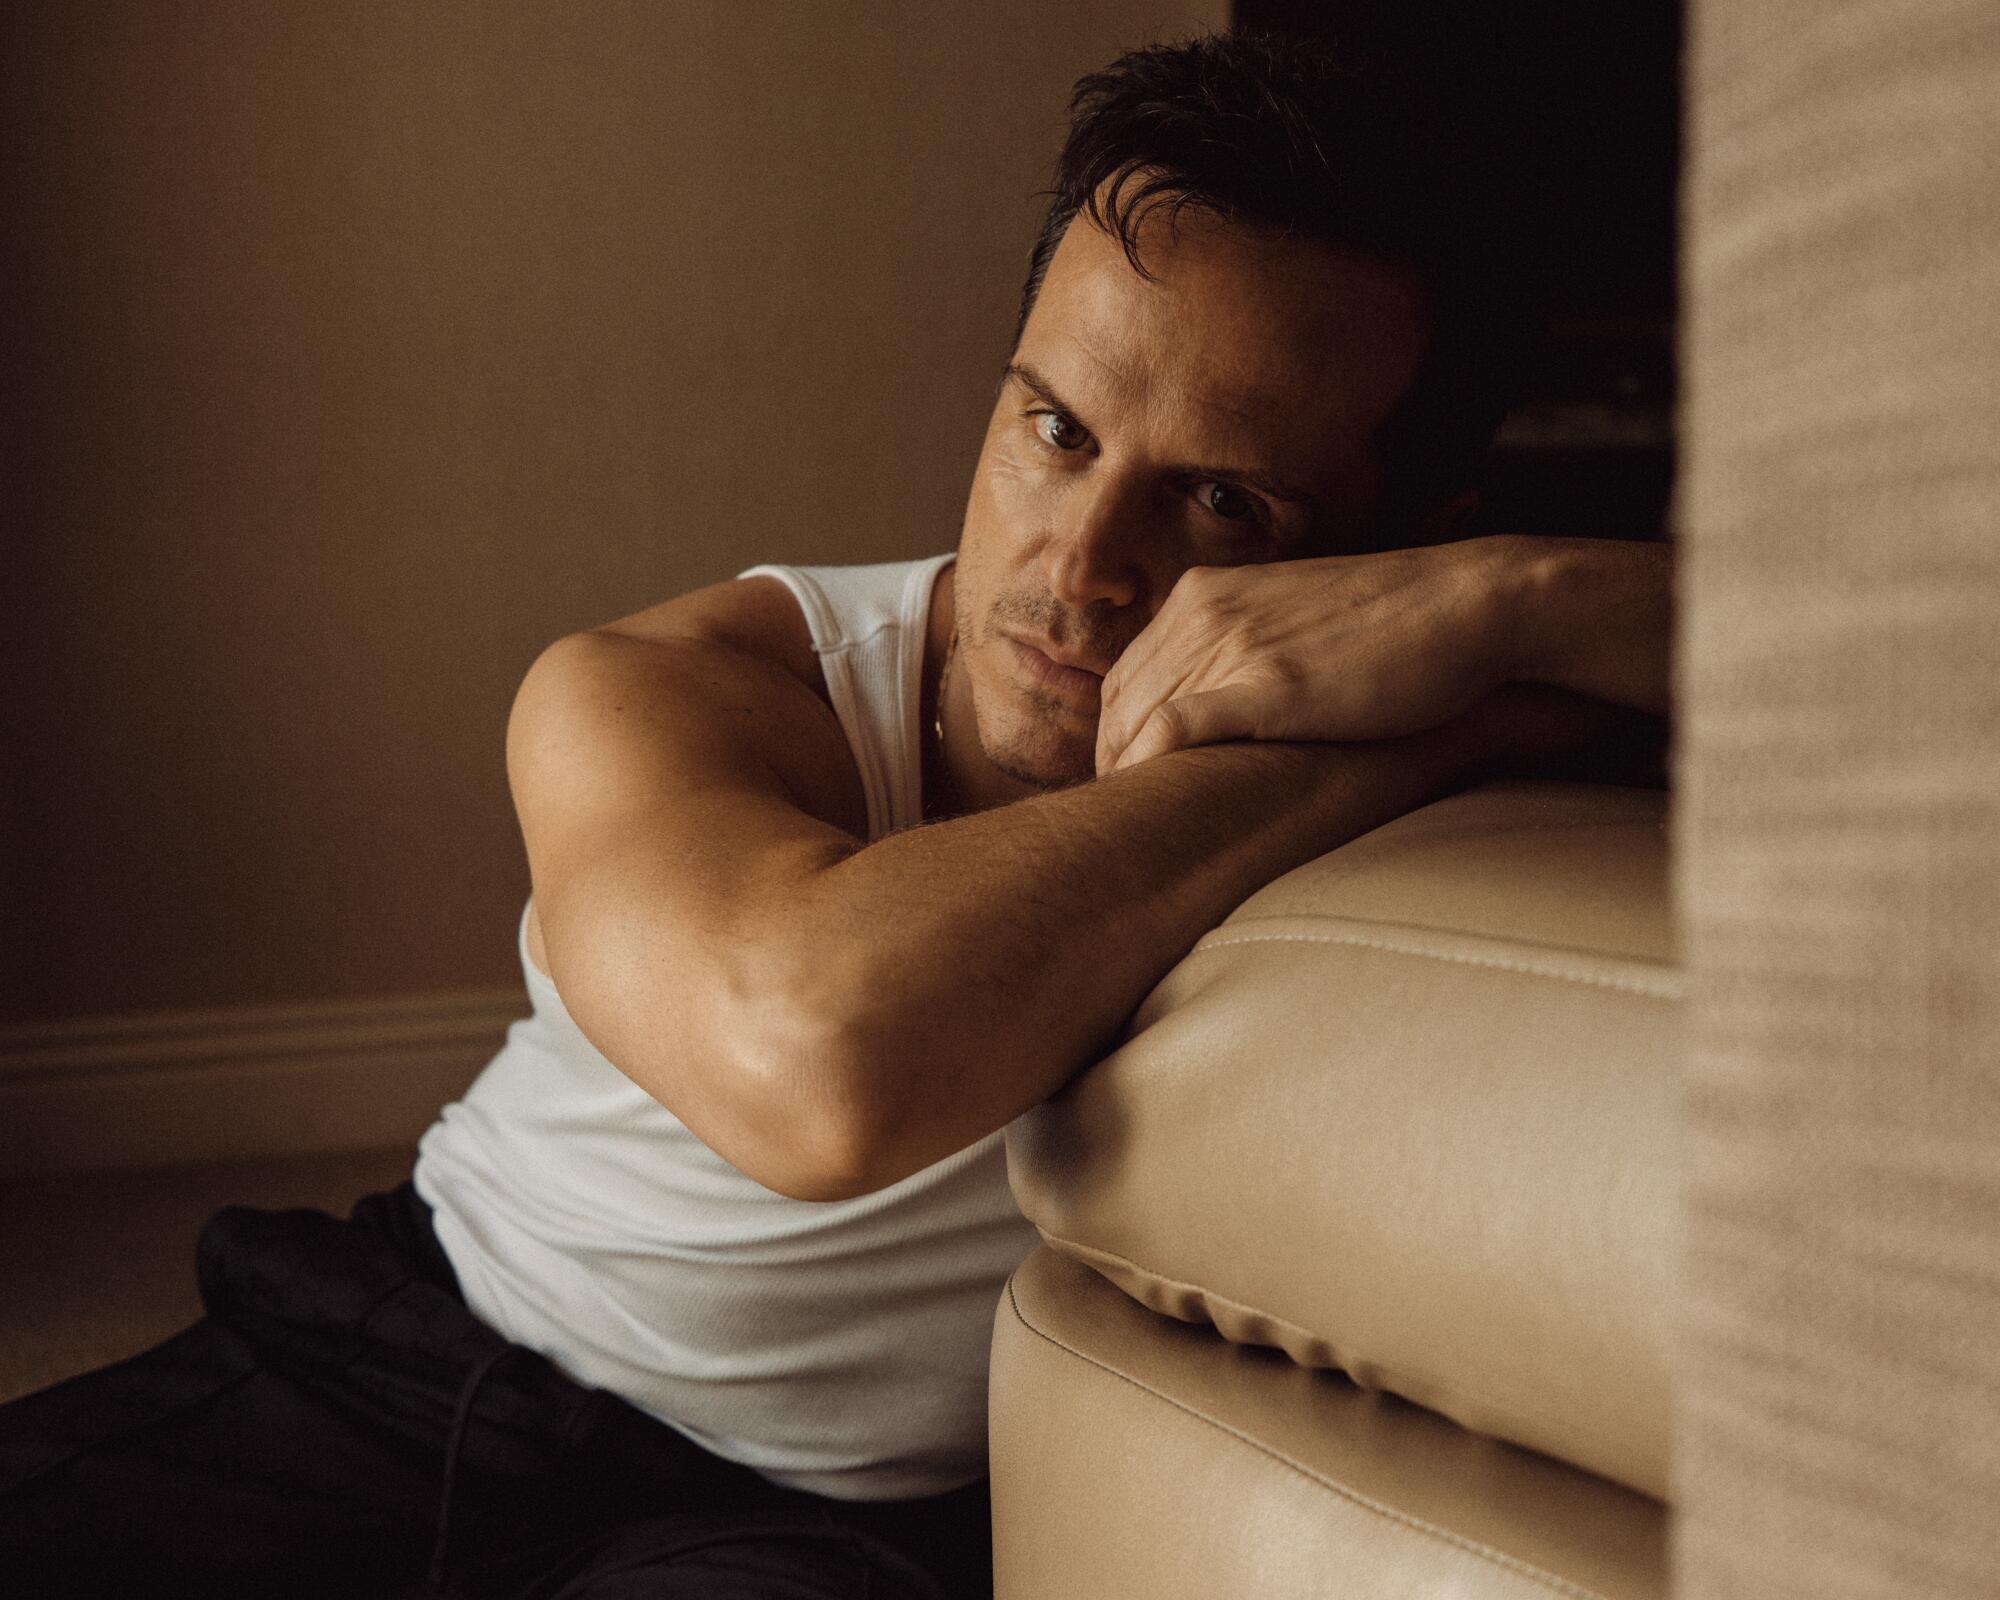 Andrew Scott wears a sleeveless shirt and leans his head on a couch for a portrait.
